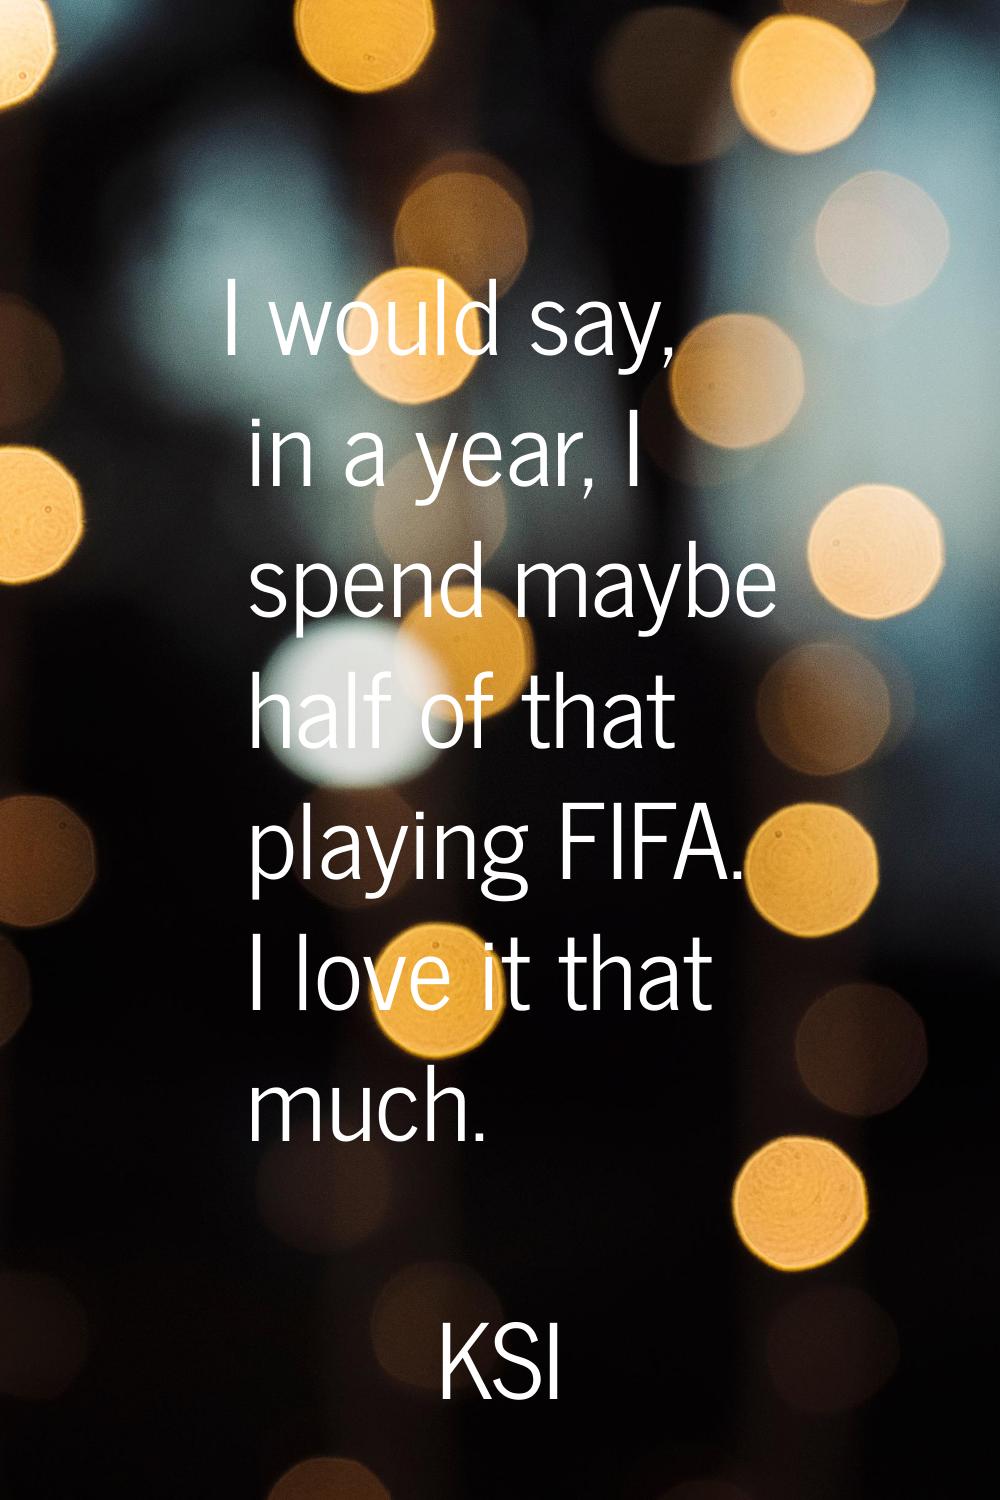 I would say, in a year, I spend maybe half of that playing FIFA. I love it that much.